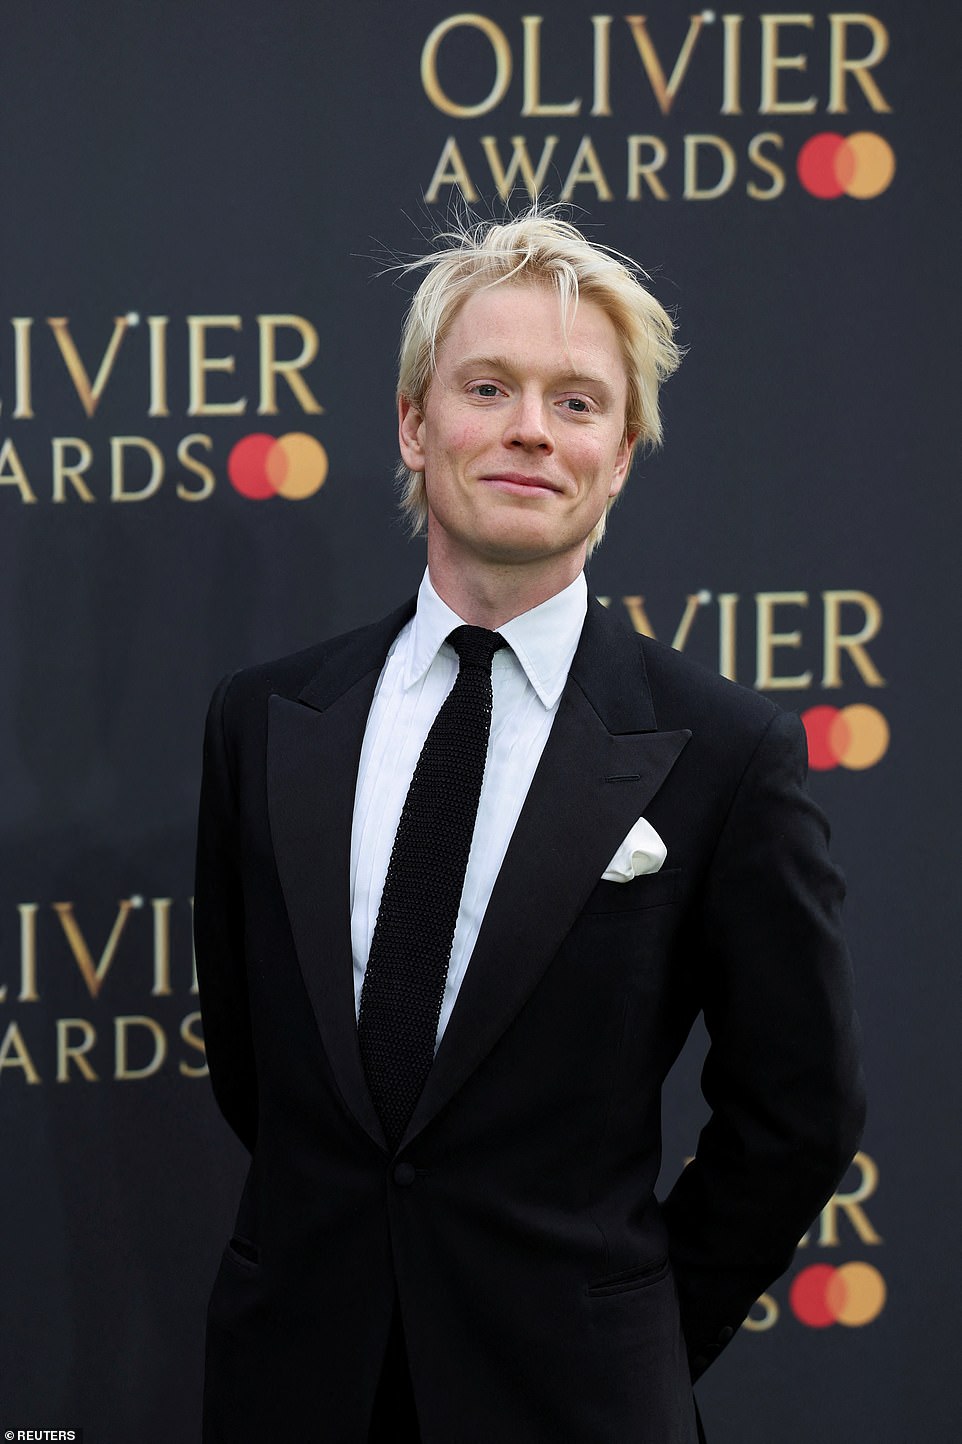 Freddie Fox opted for a classic black tuxedo with a cream satin pocket square, but elevated the look by adding a sequinned black tie